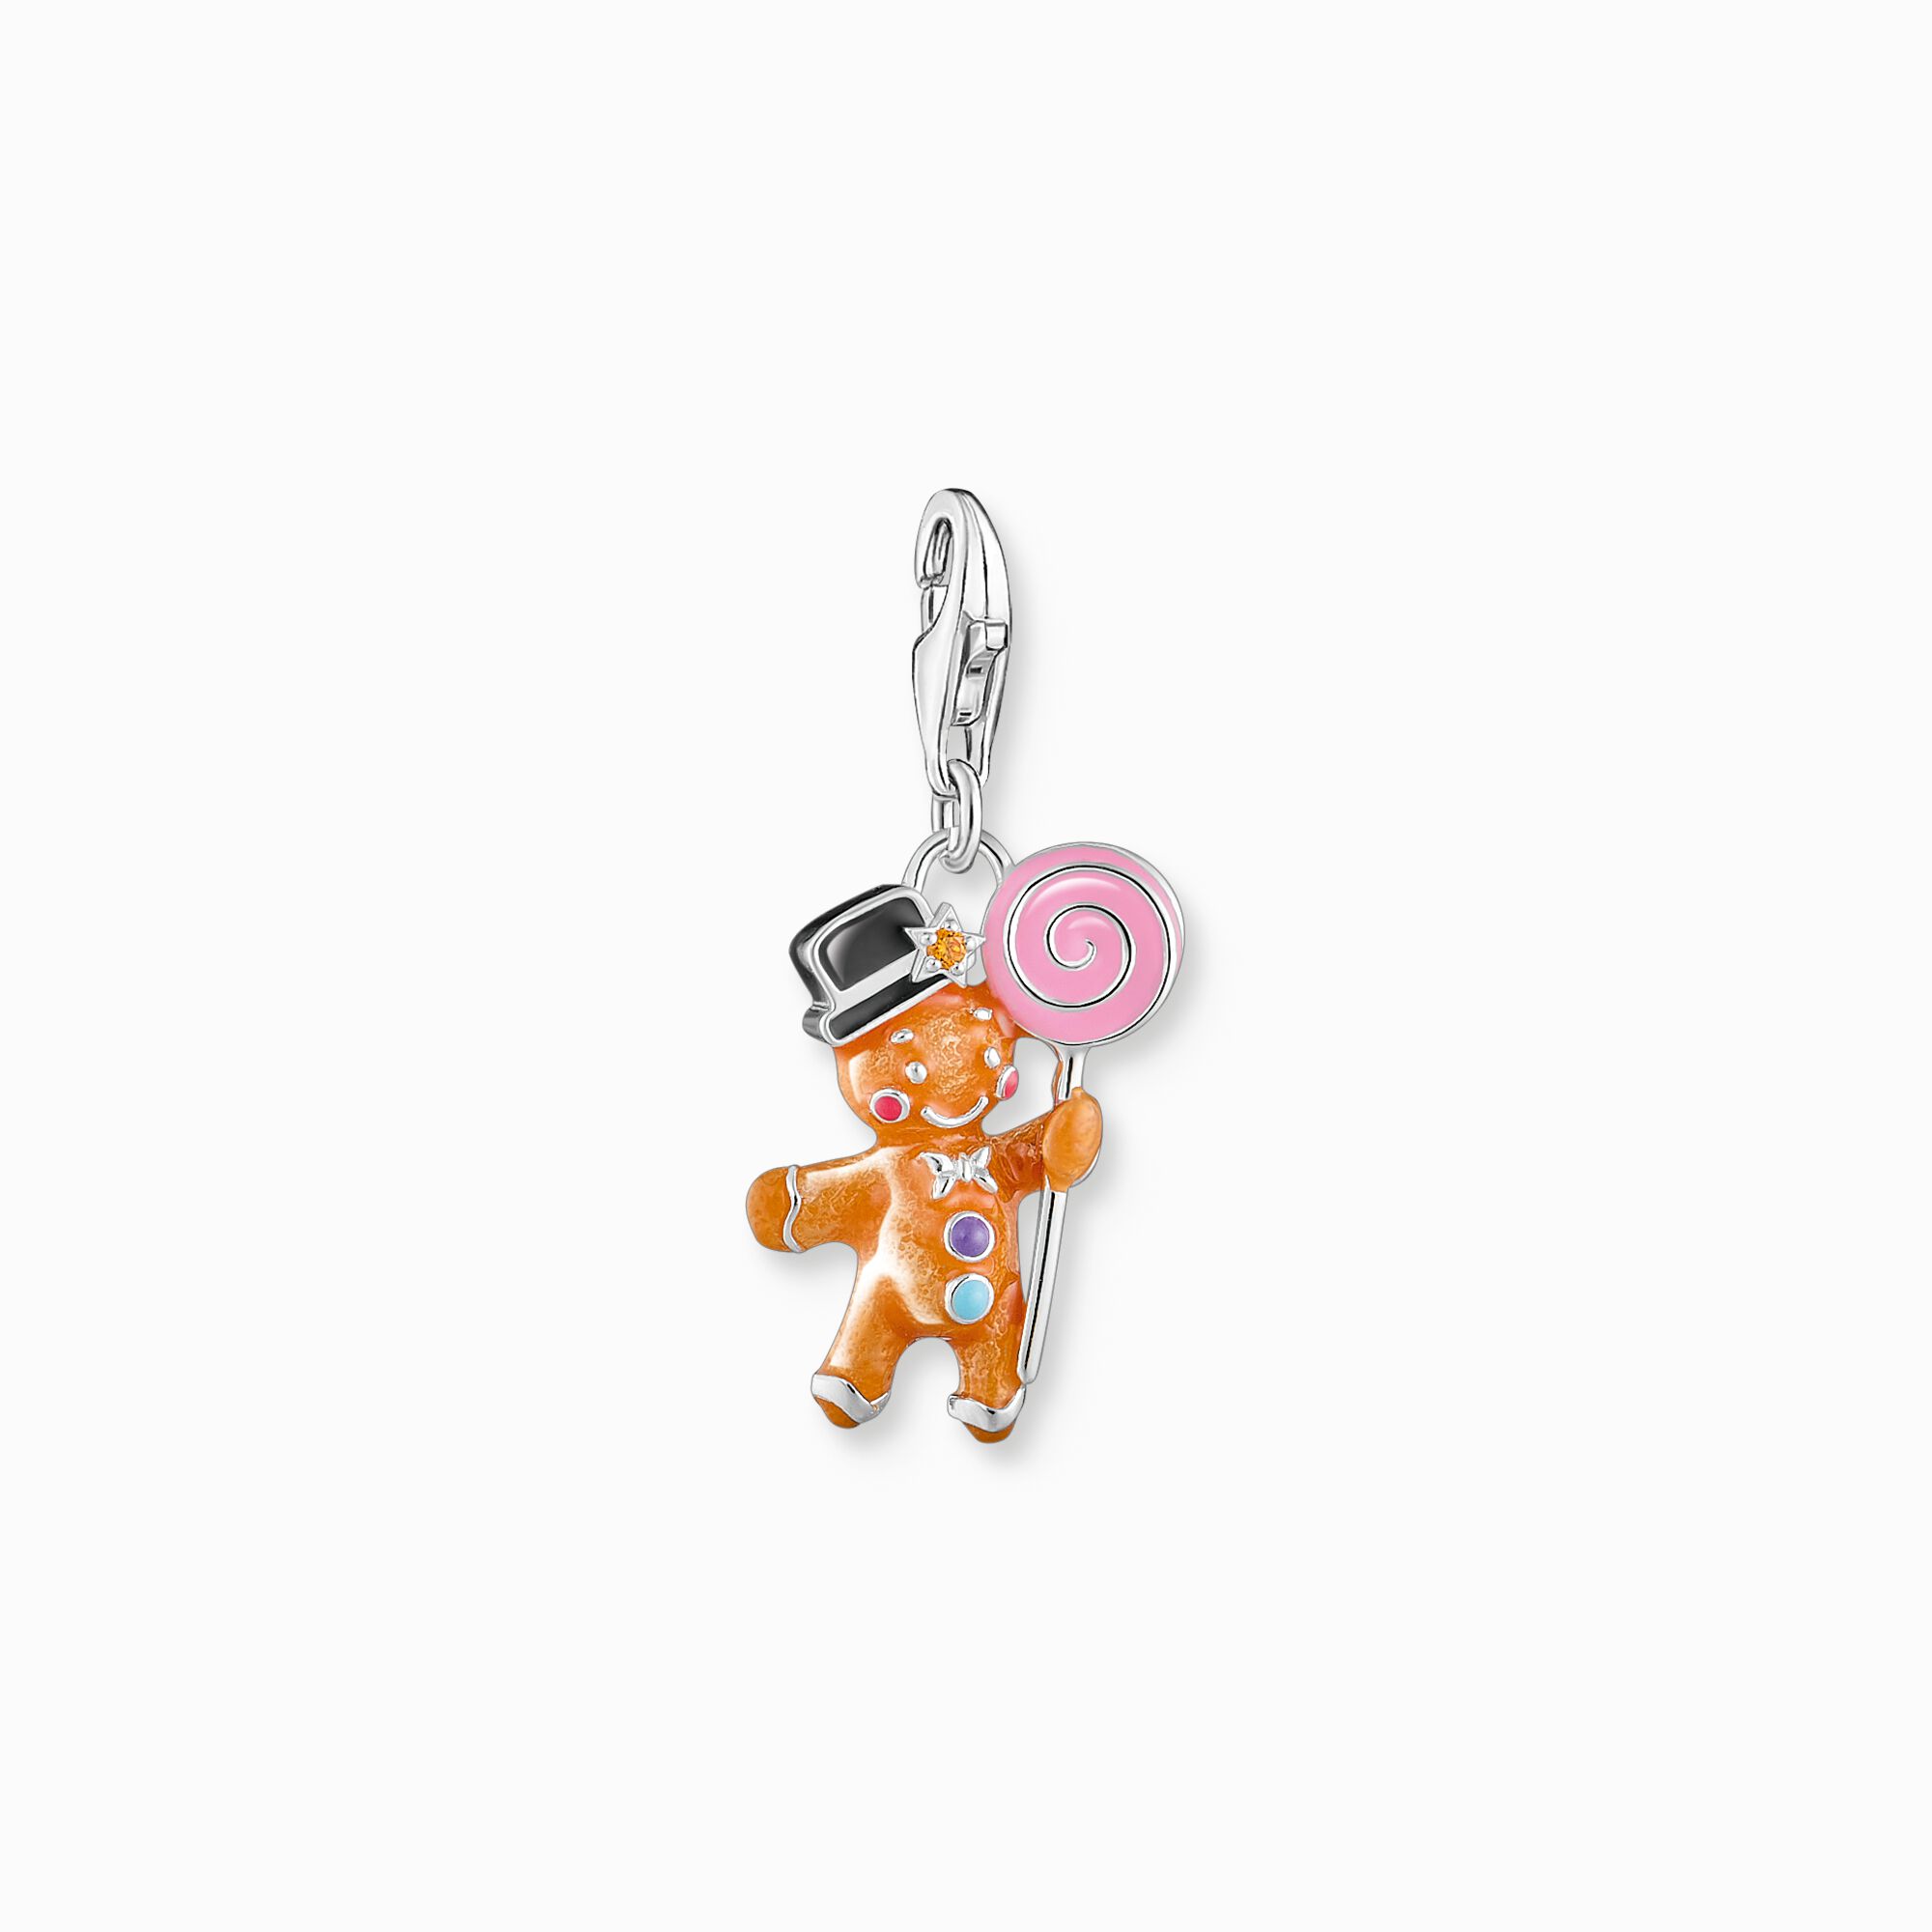 Silver charm pendant gingerbread man with stones and cold enamel from the Charm Club collection in the THOMAS SABO online store